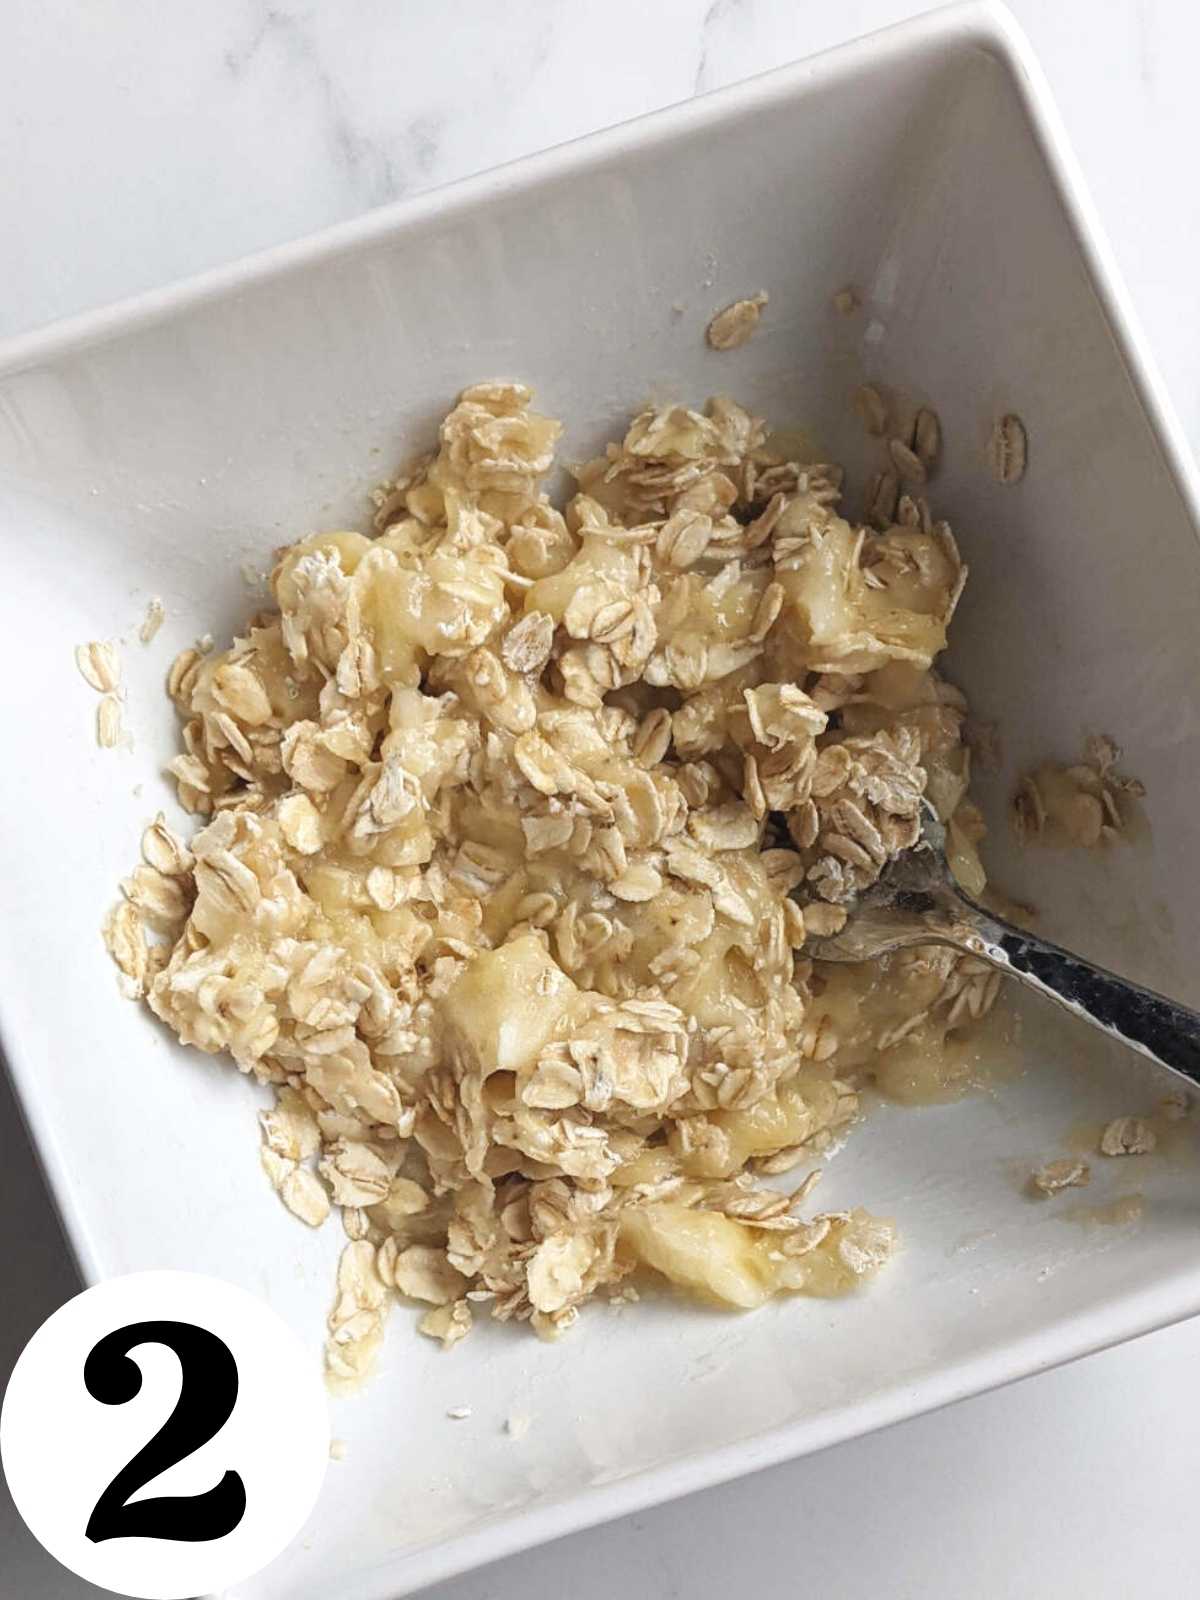 Mashed banana and oats mixed together in a bowl.